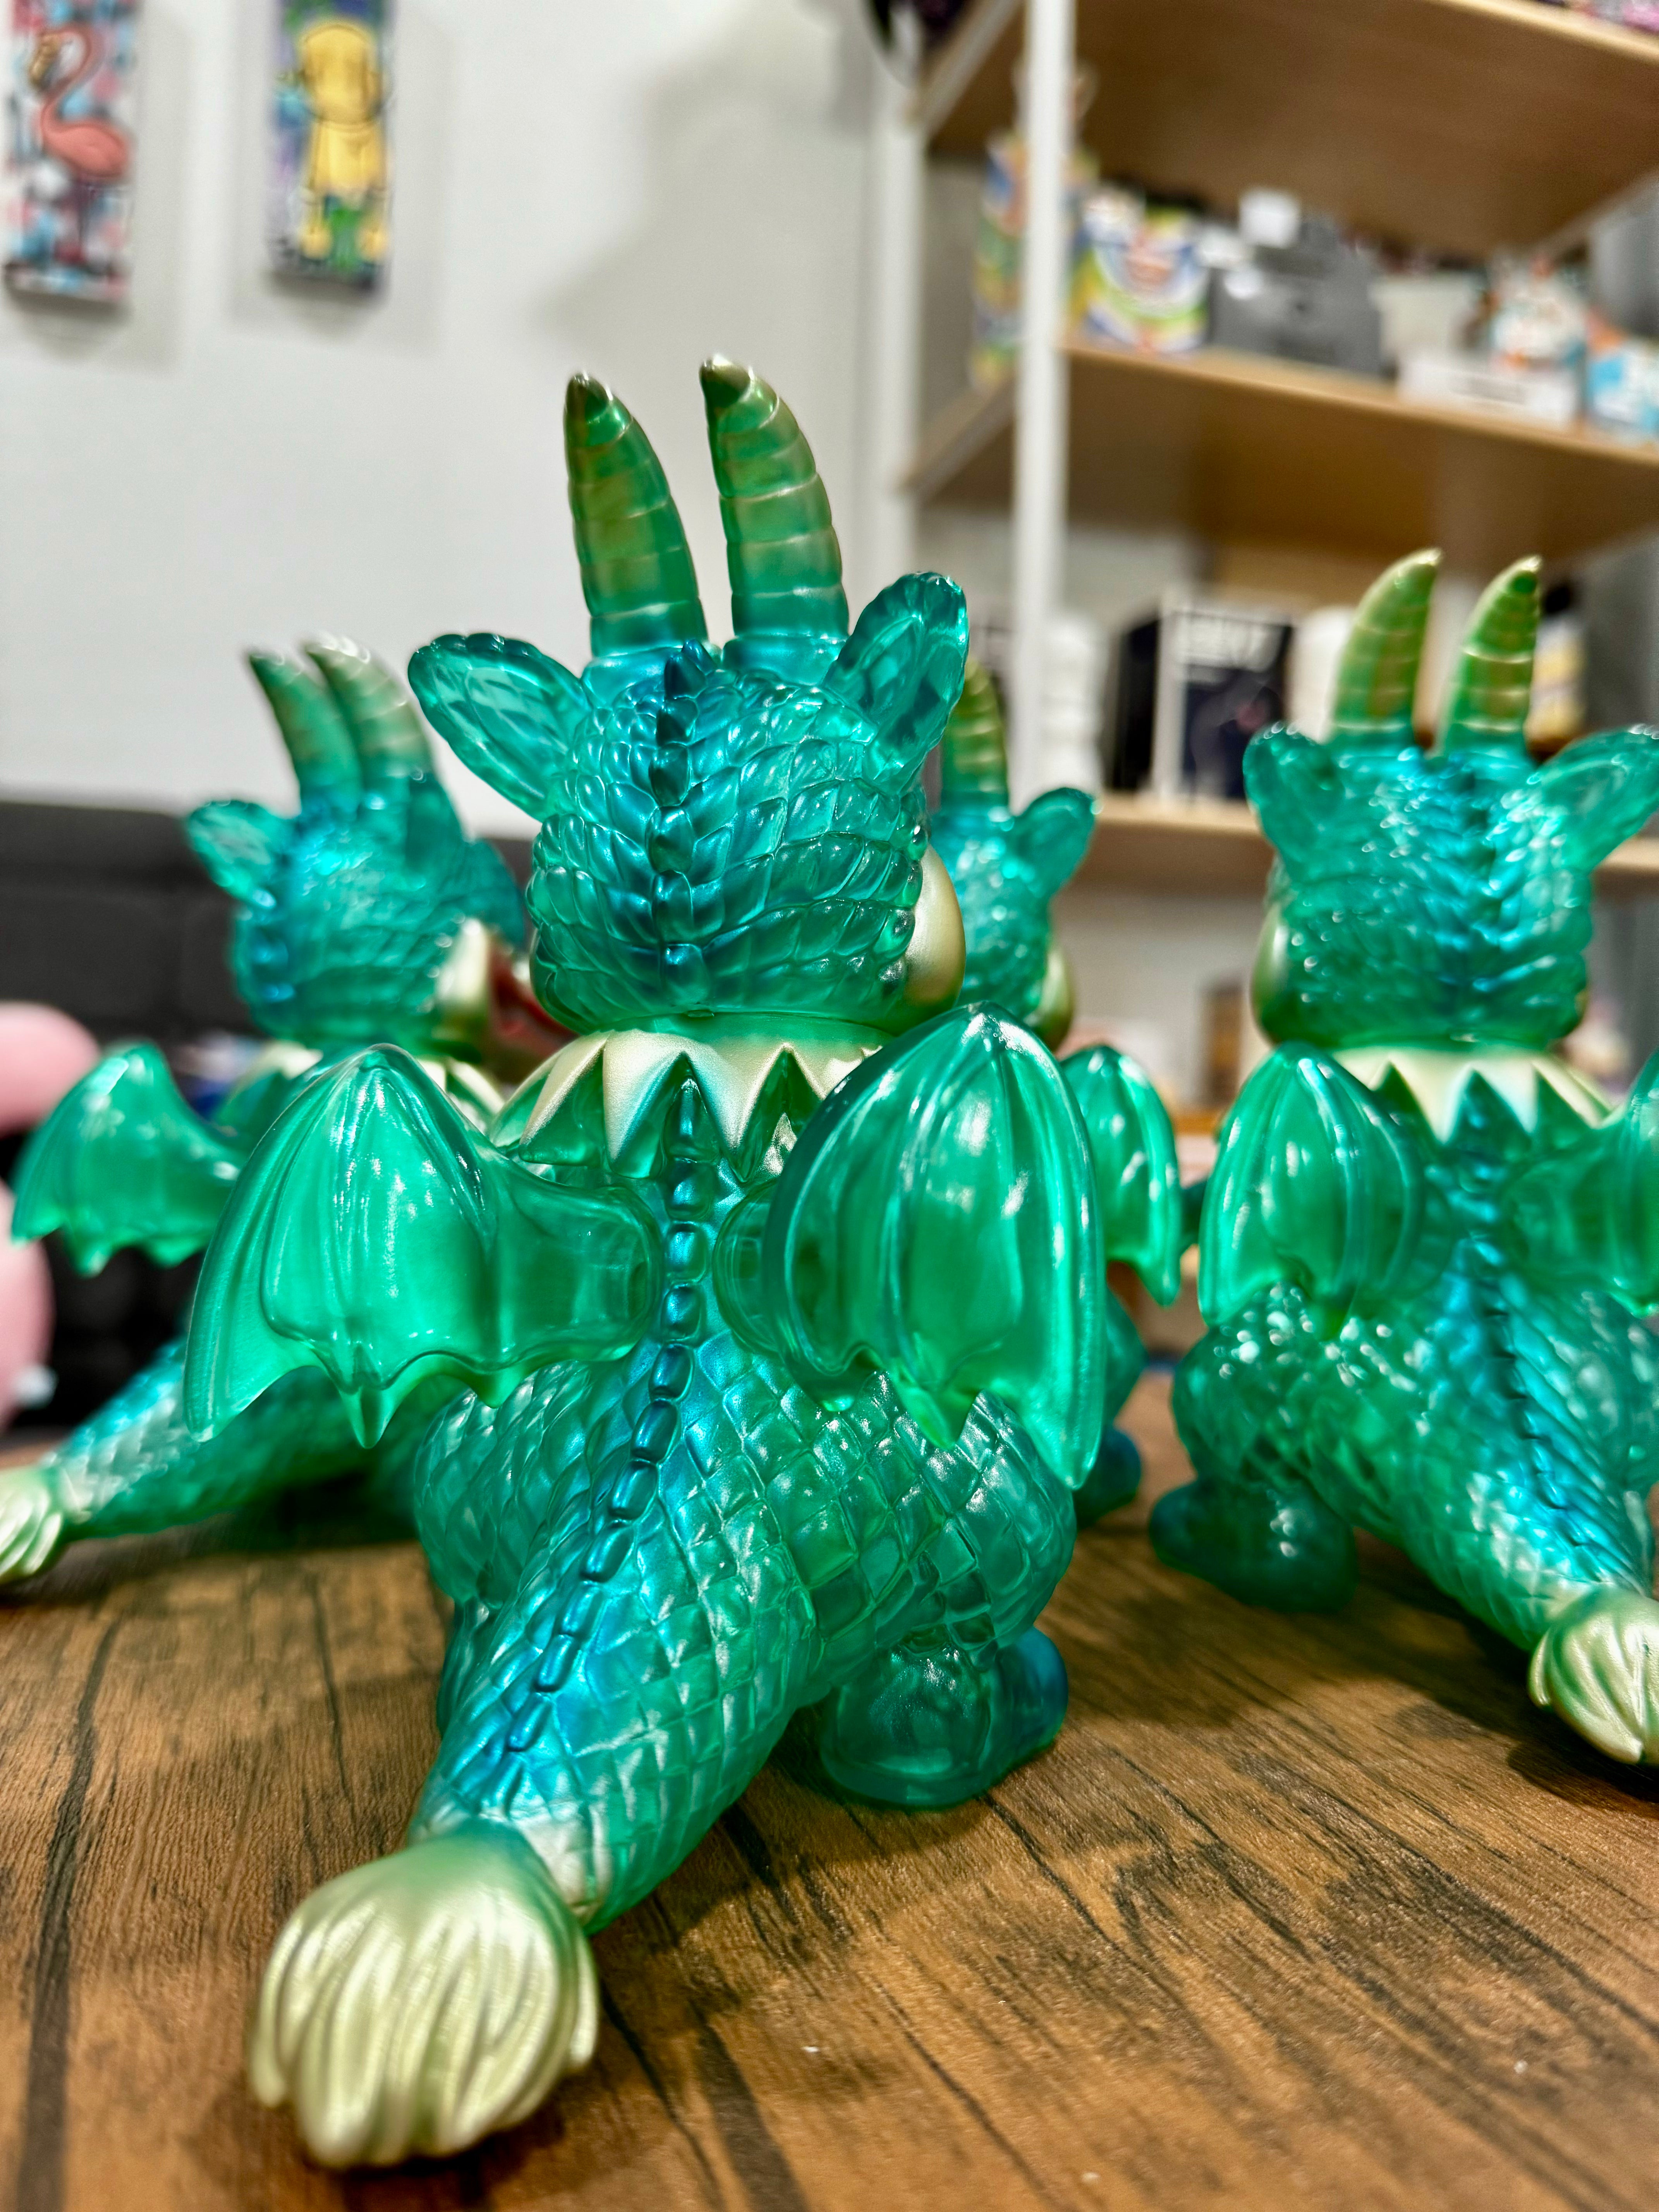 A group of green plastic dragon figurines, including a close-up of the Calm Dragon Clear Mint toy by Art Junkie, embodying Strangecat Toys' blind box and art toy store essence.